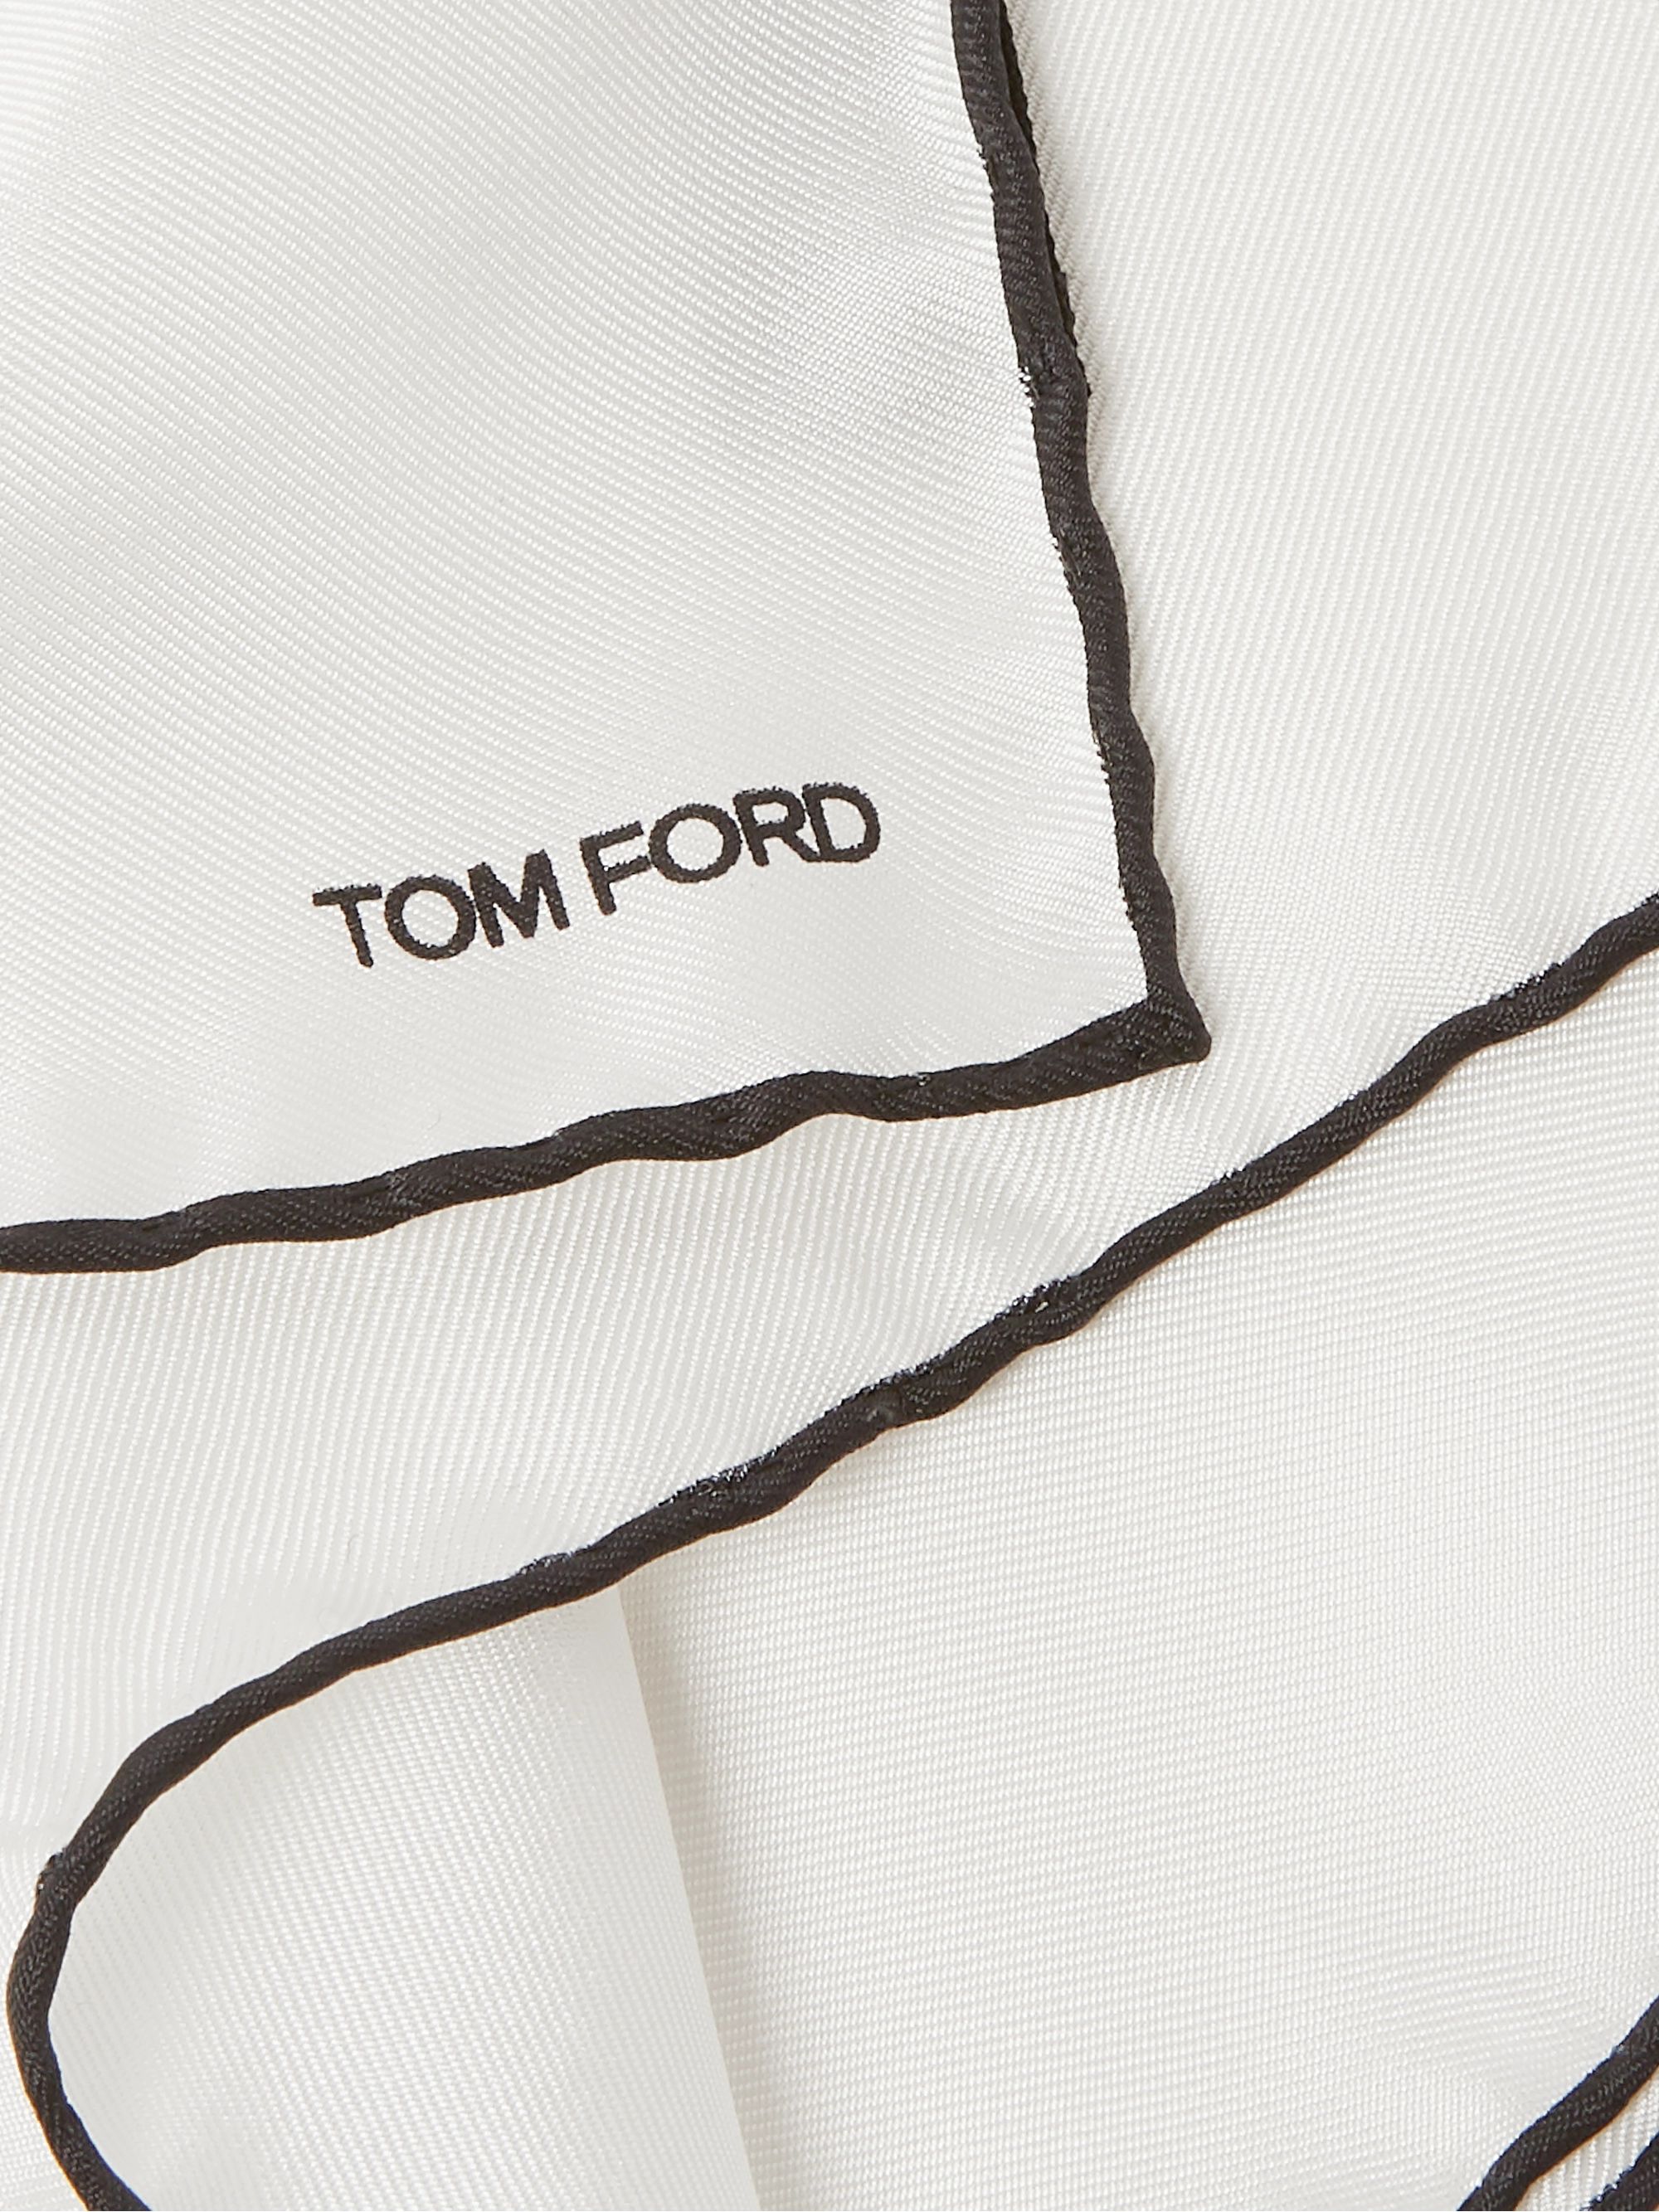 White Contrast-Tipped Silk-Twill Pocket Square | TOM FORD | MR PORTER